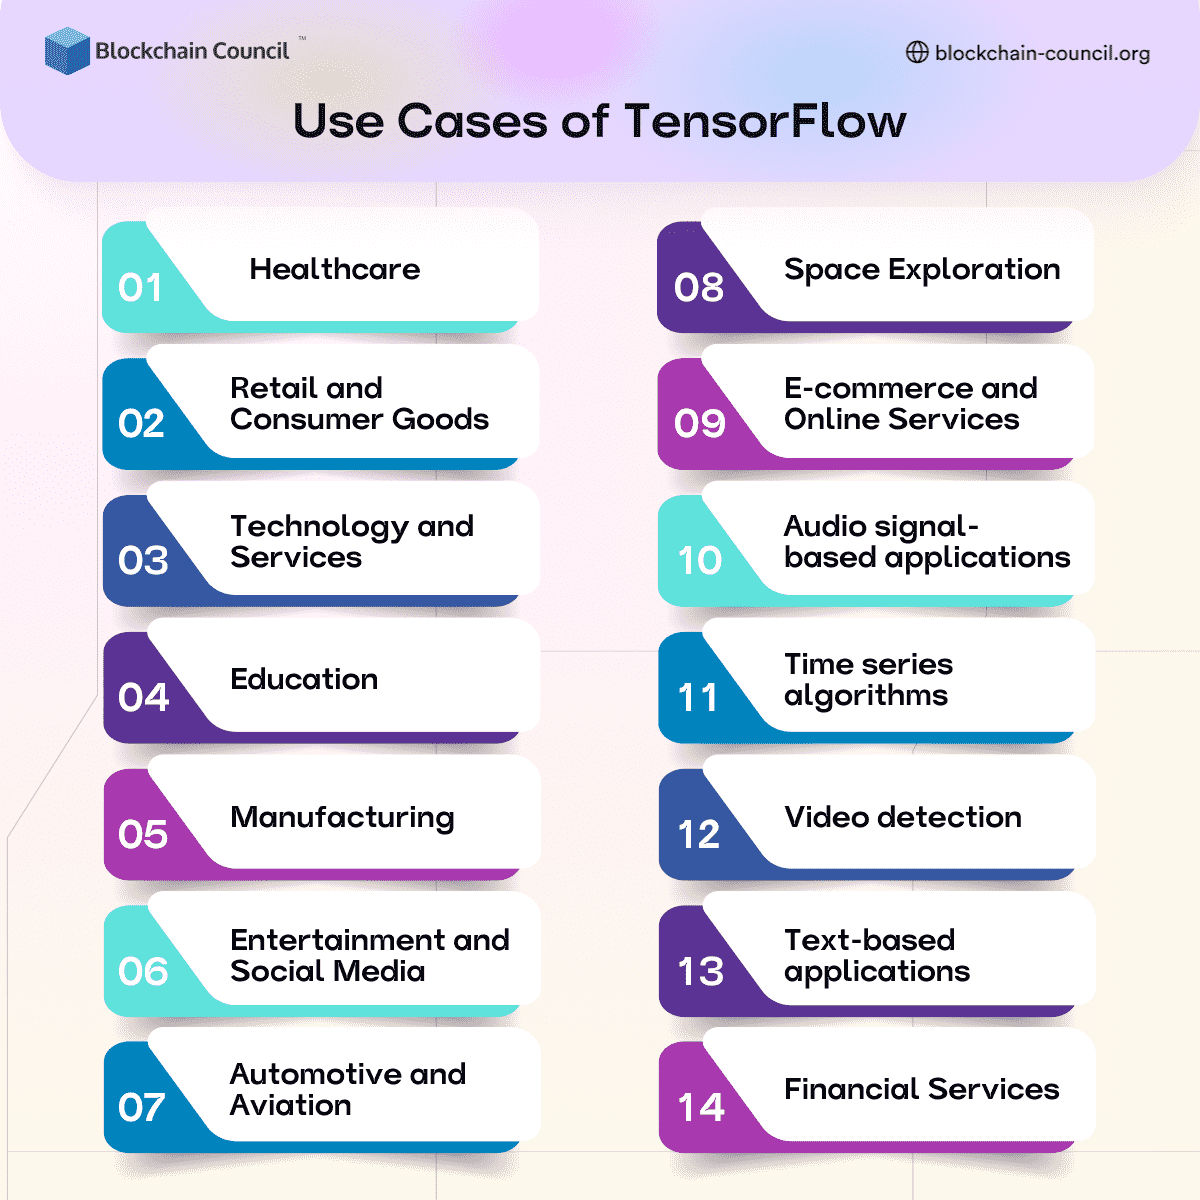 Use Cases of TensorFlow